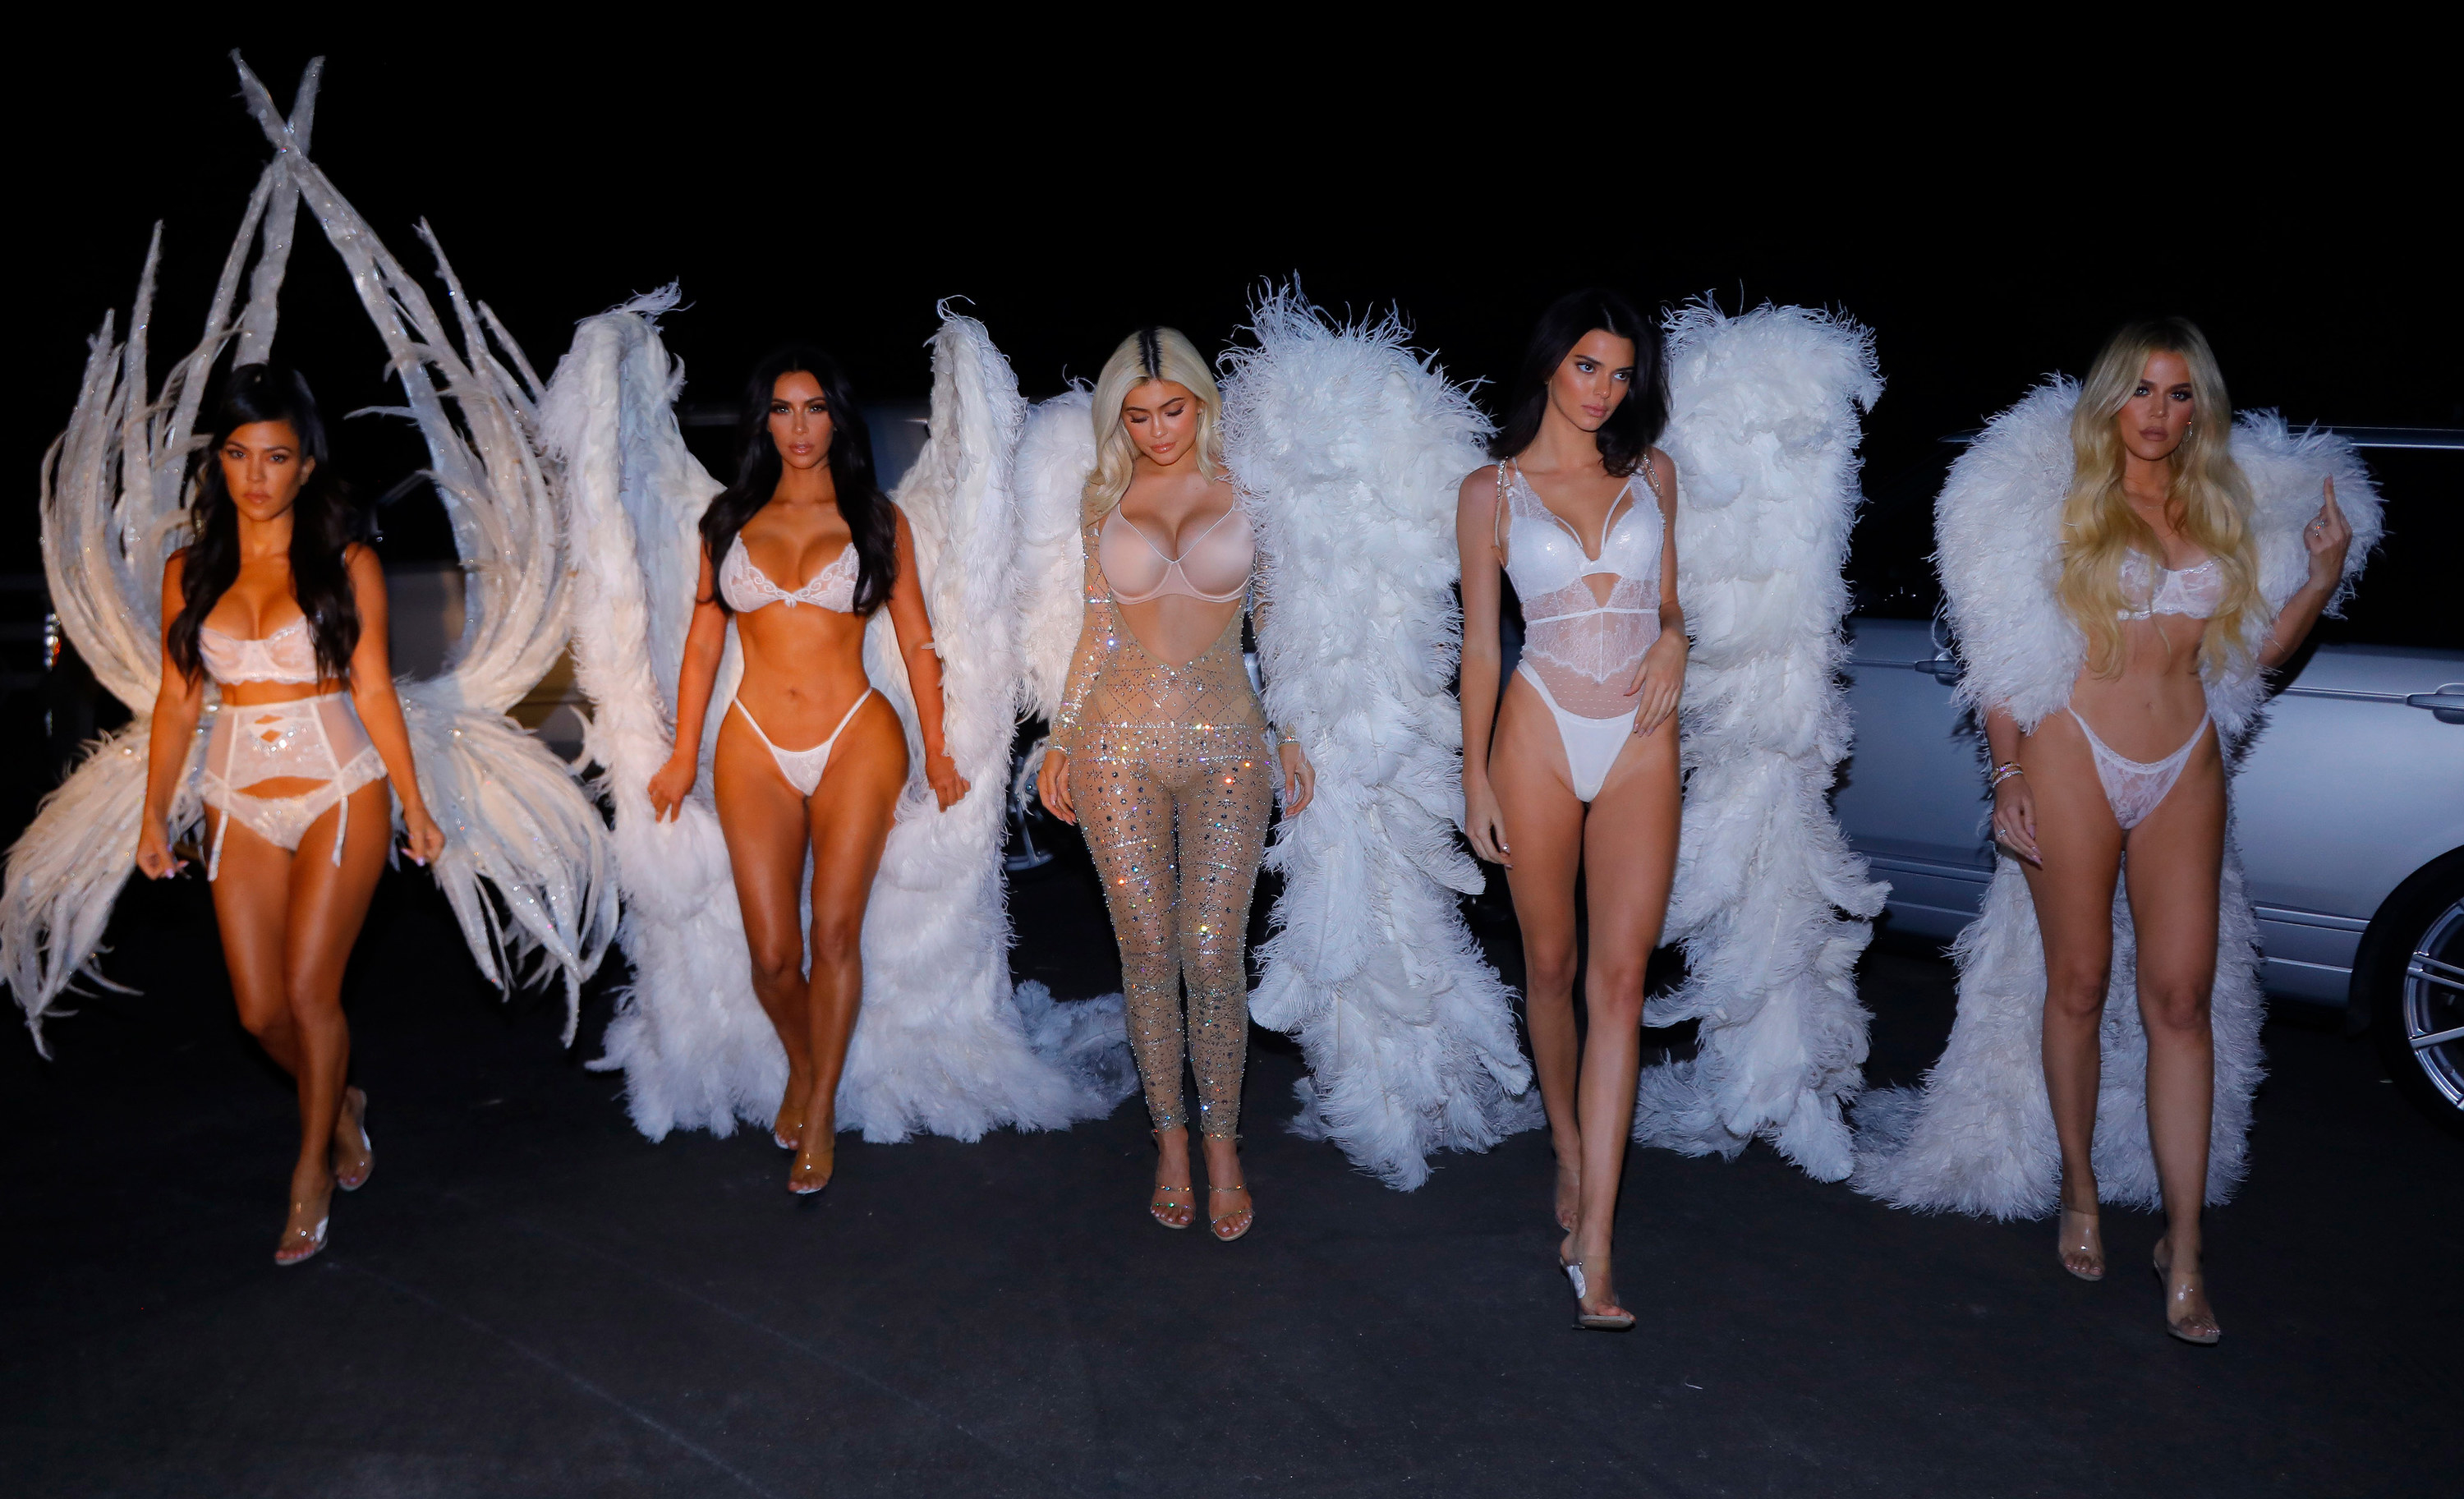 Kourtney, Kim, and Khloe Kardashain with Kendall and Kylie Jenner dressed as Victoria Secret Angels